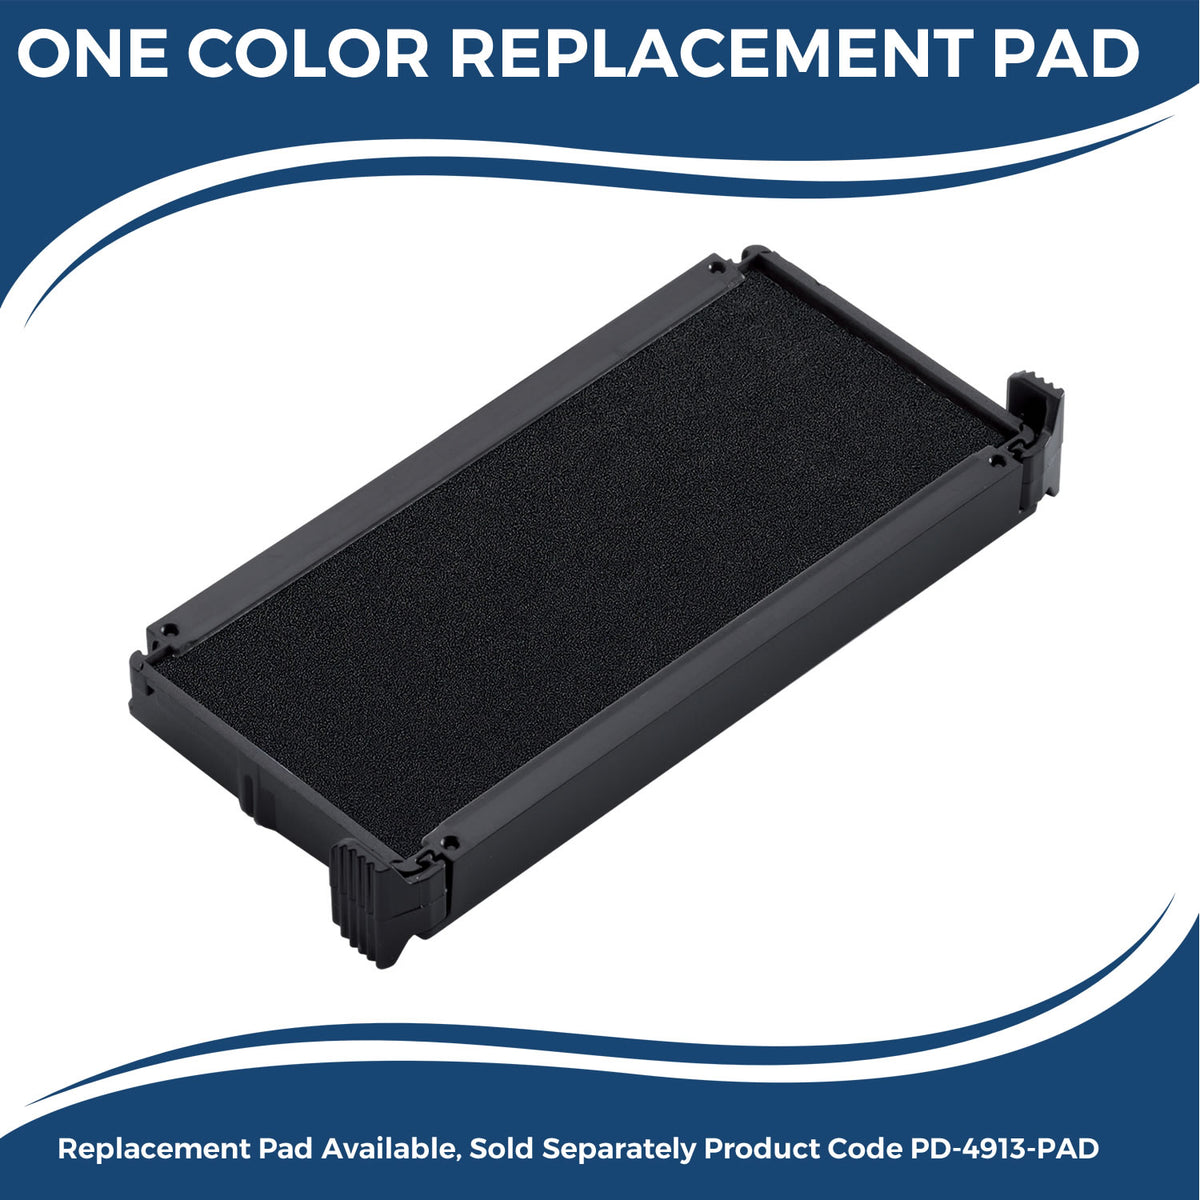 Large Self-Inking Contestado Stamp 5523S Large Replacment Pad